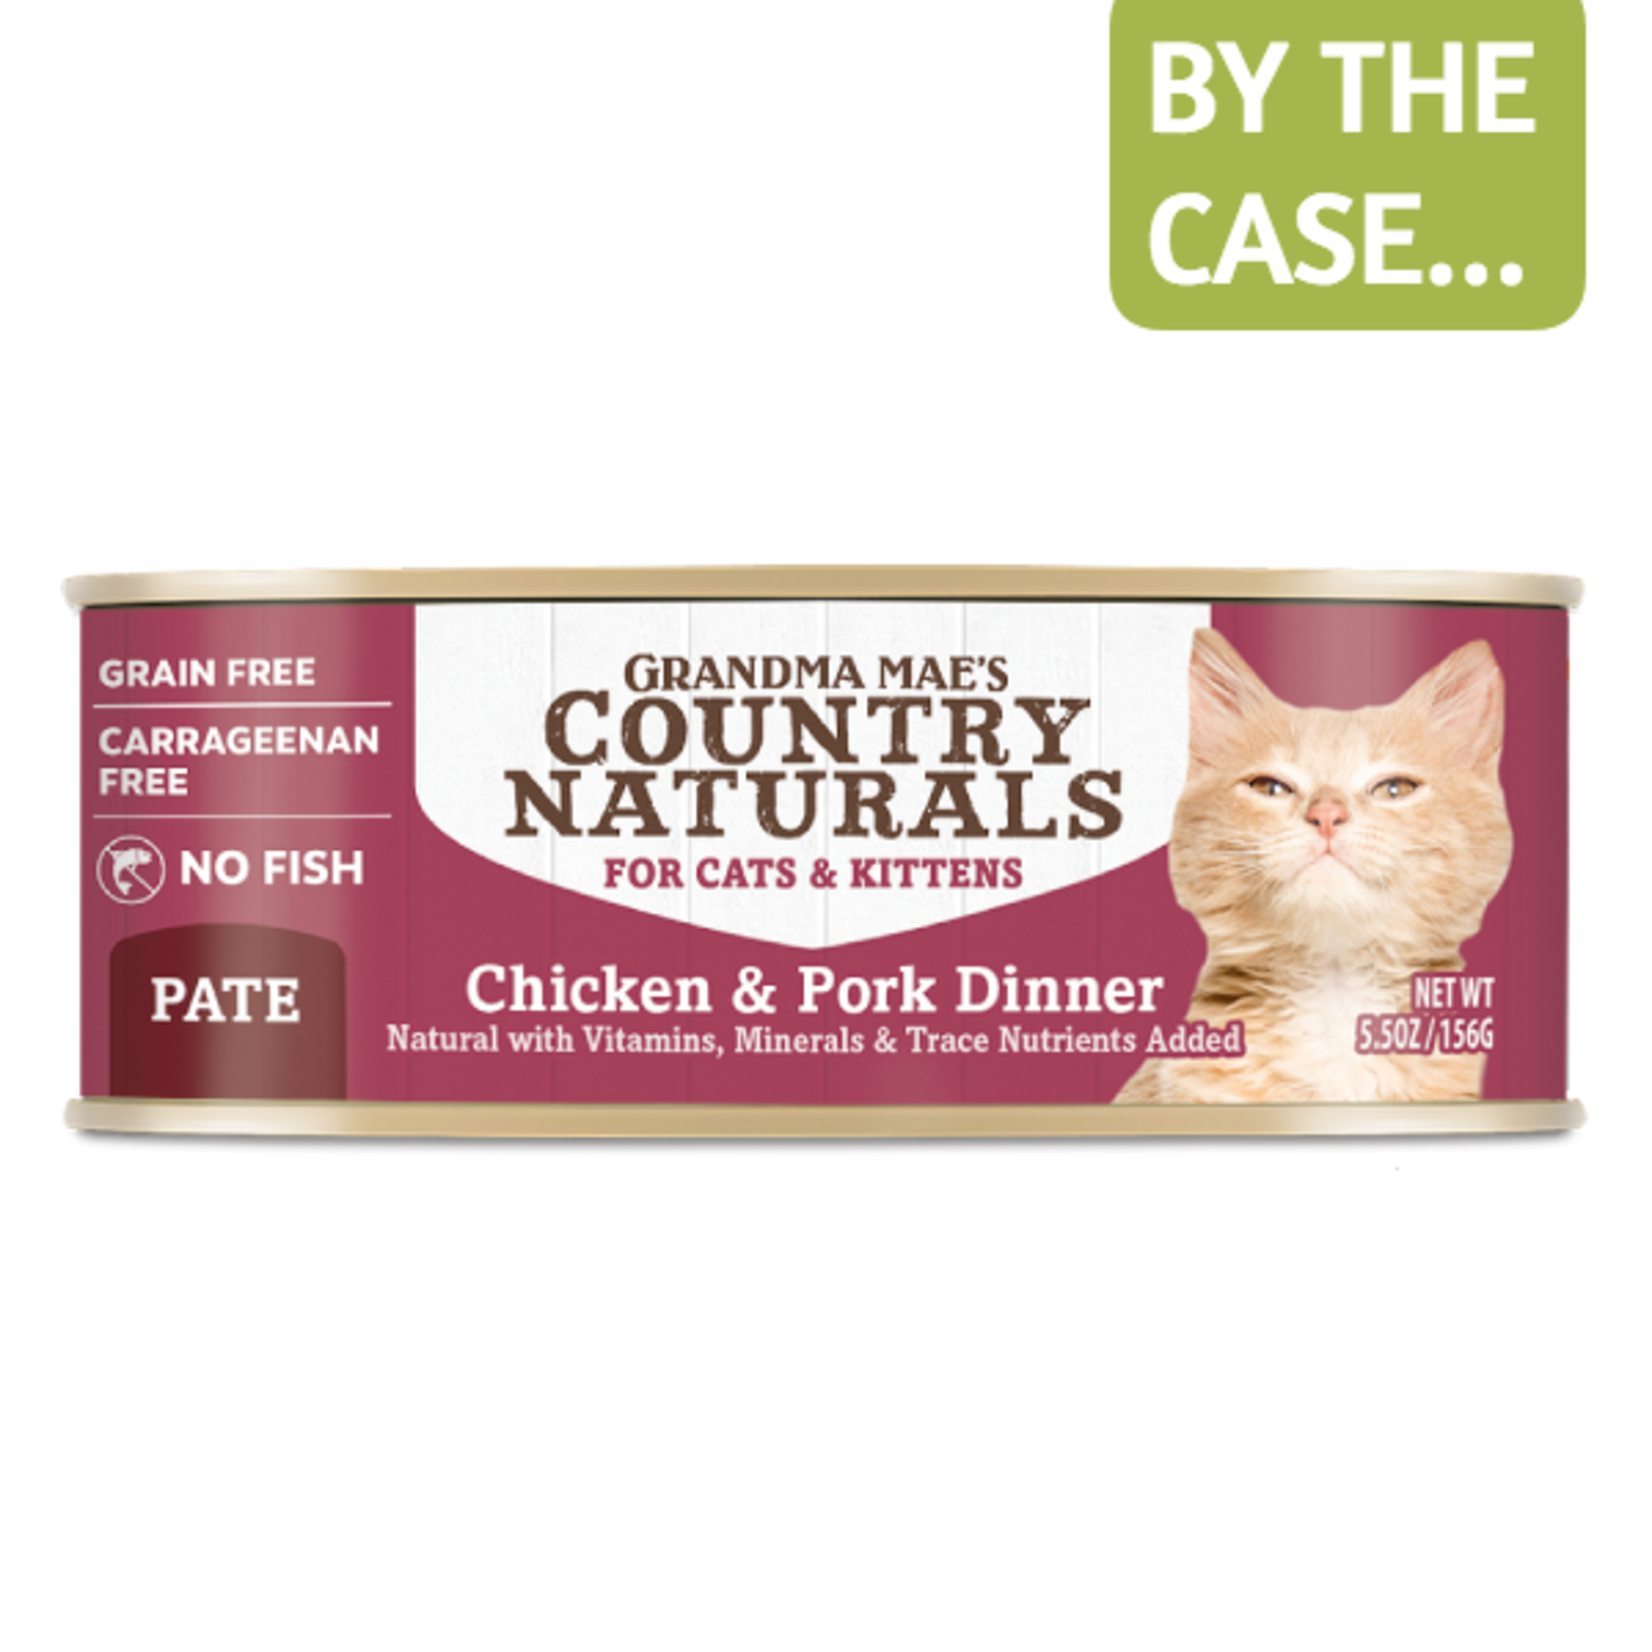 Grandma Maes Country Naturals Grandma Mae's Country Naturals Wet Cat Food Chicken and Pork Dinner Pate 5.5oz Grain Free